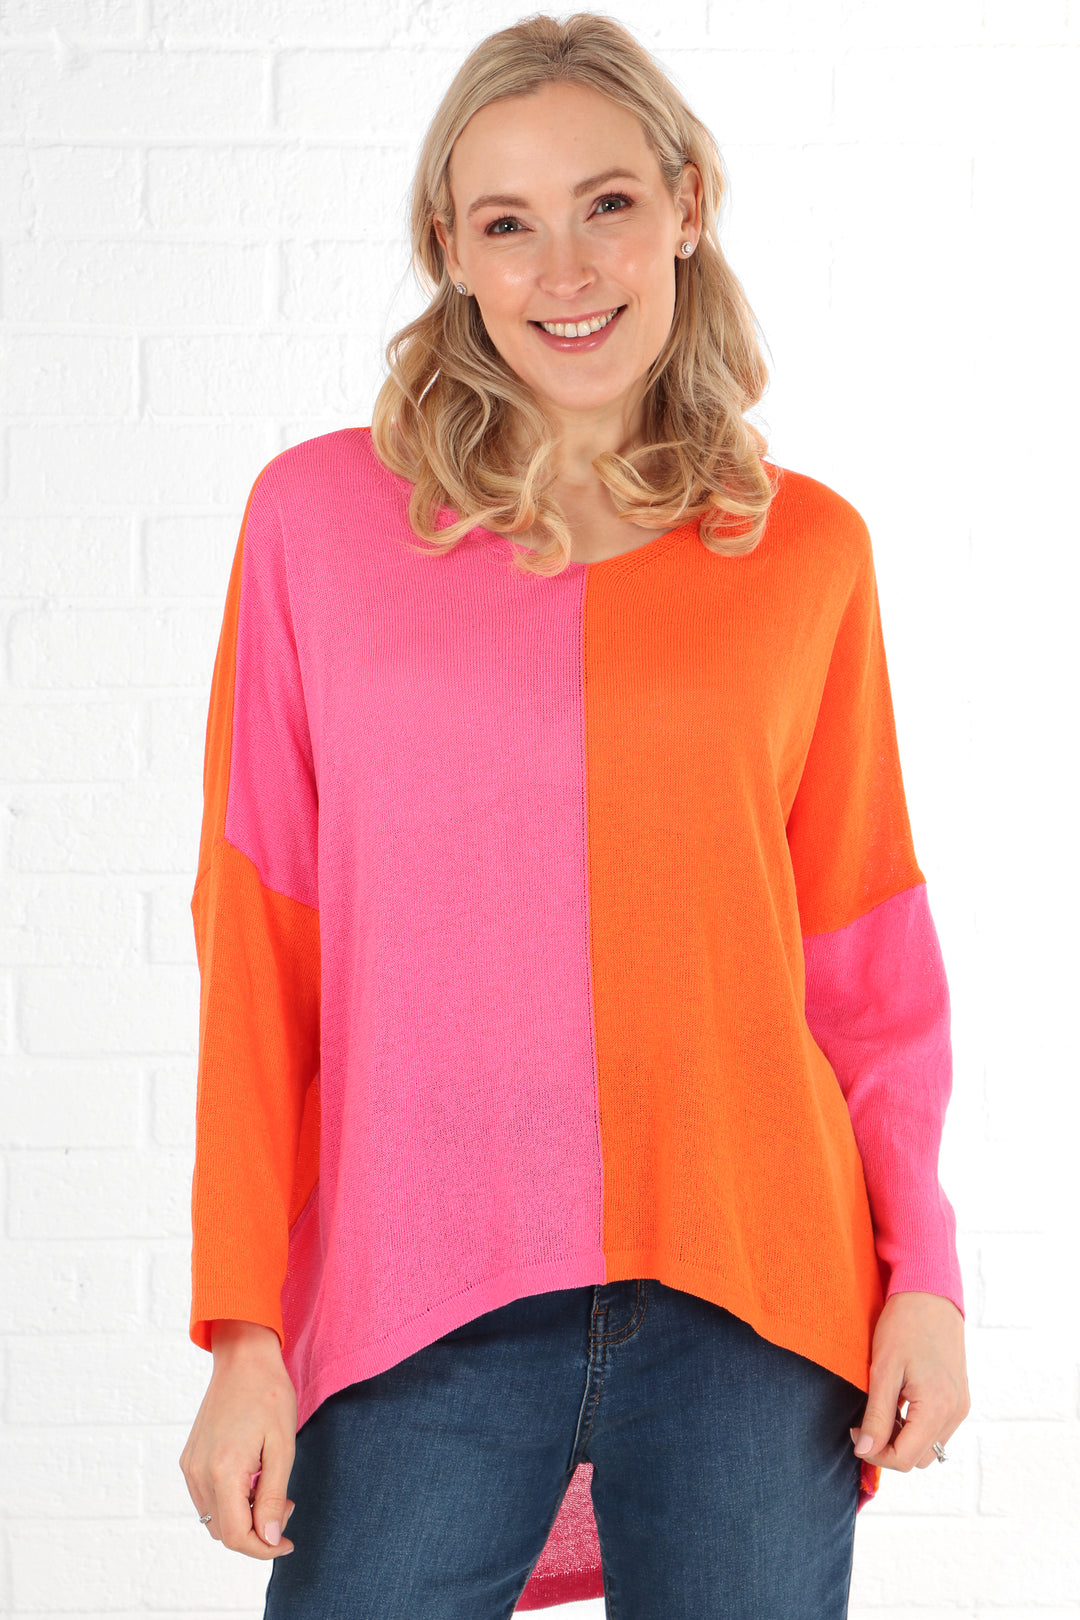 model showing the front of the two tone pink and orange cotton jumper